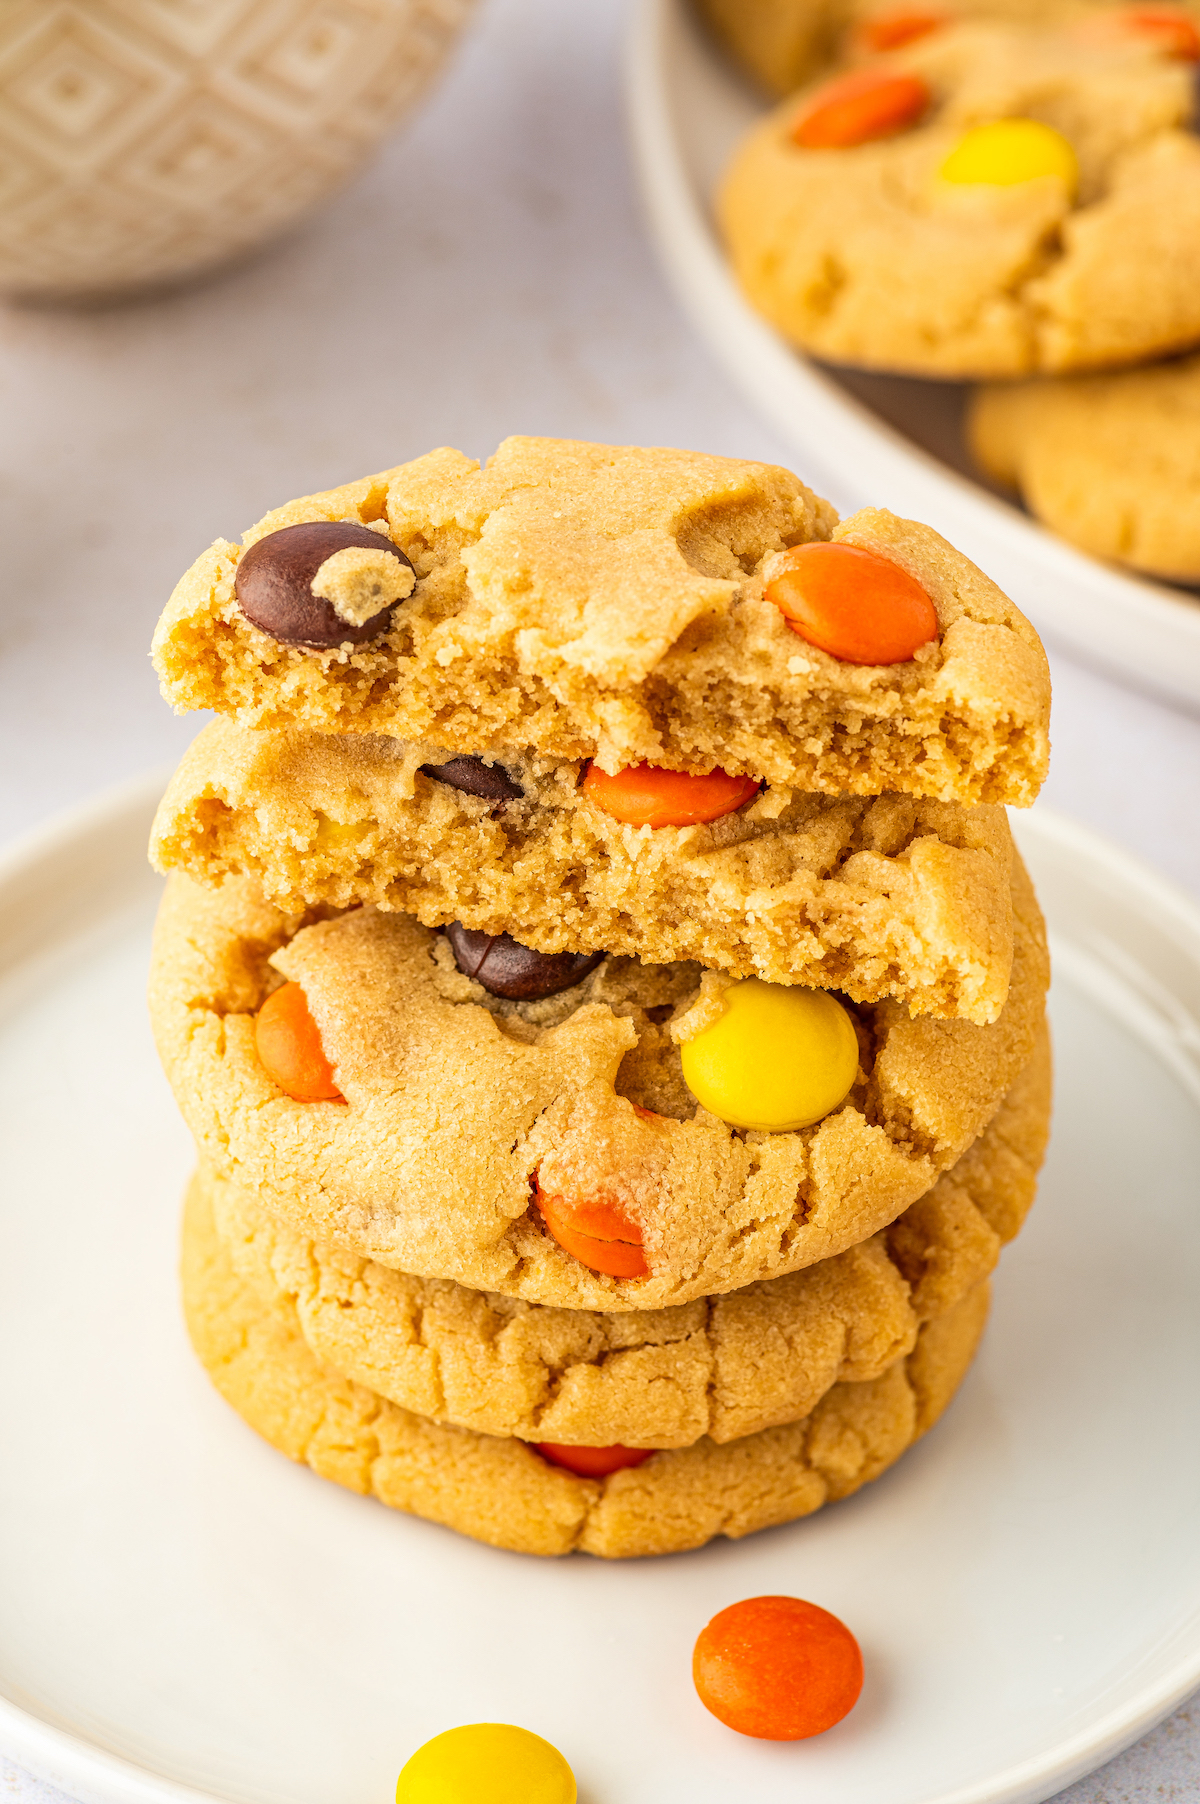 Peanut butter cookies with Reese's Pieces, stacked on top of each other.